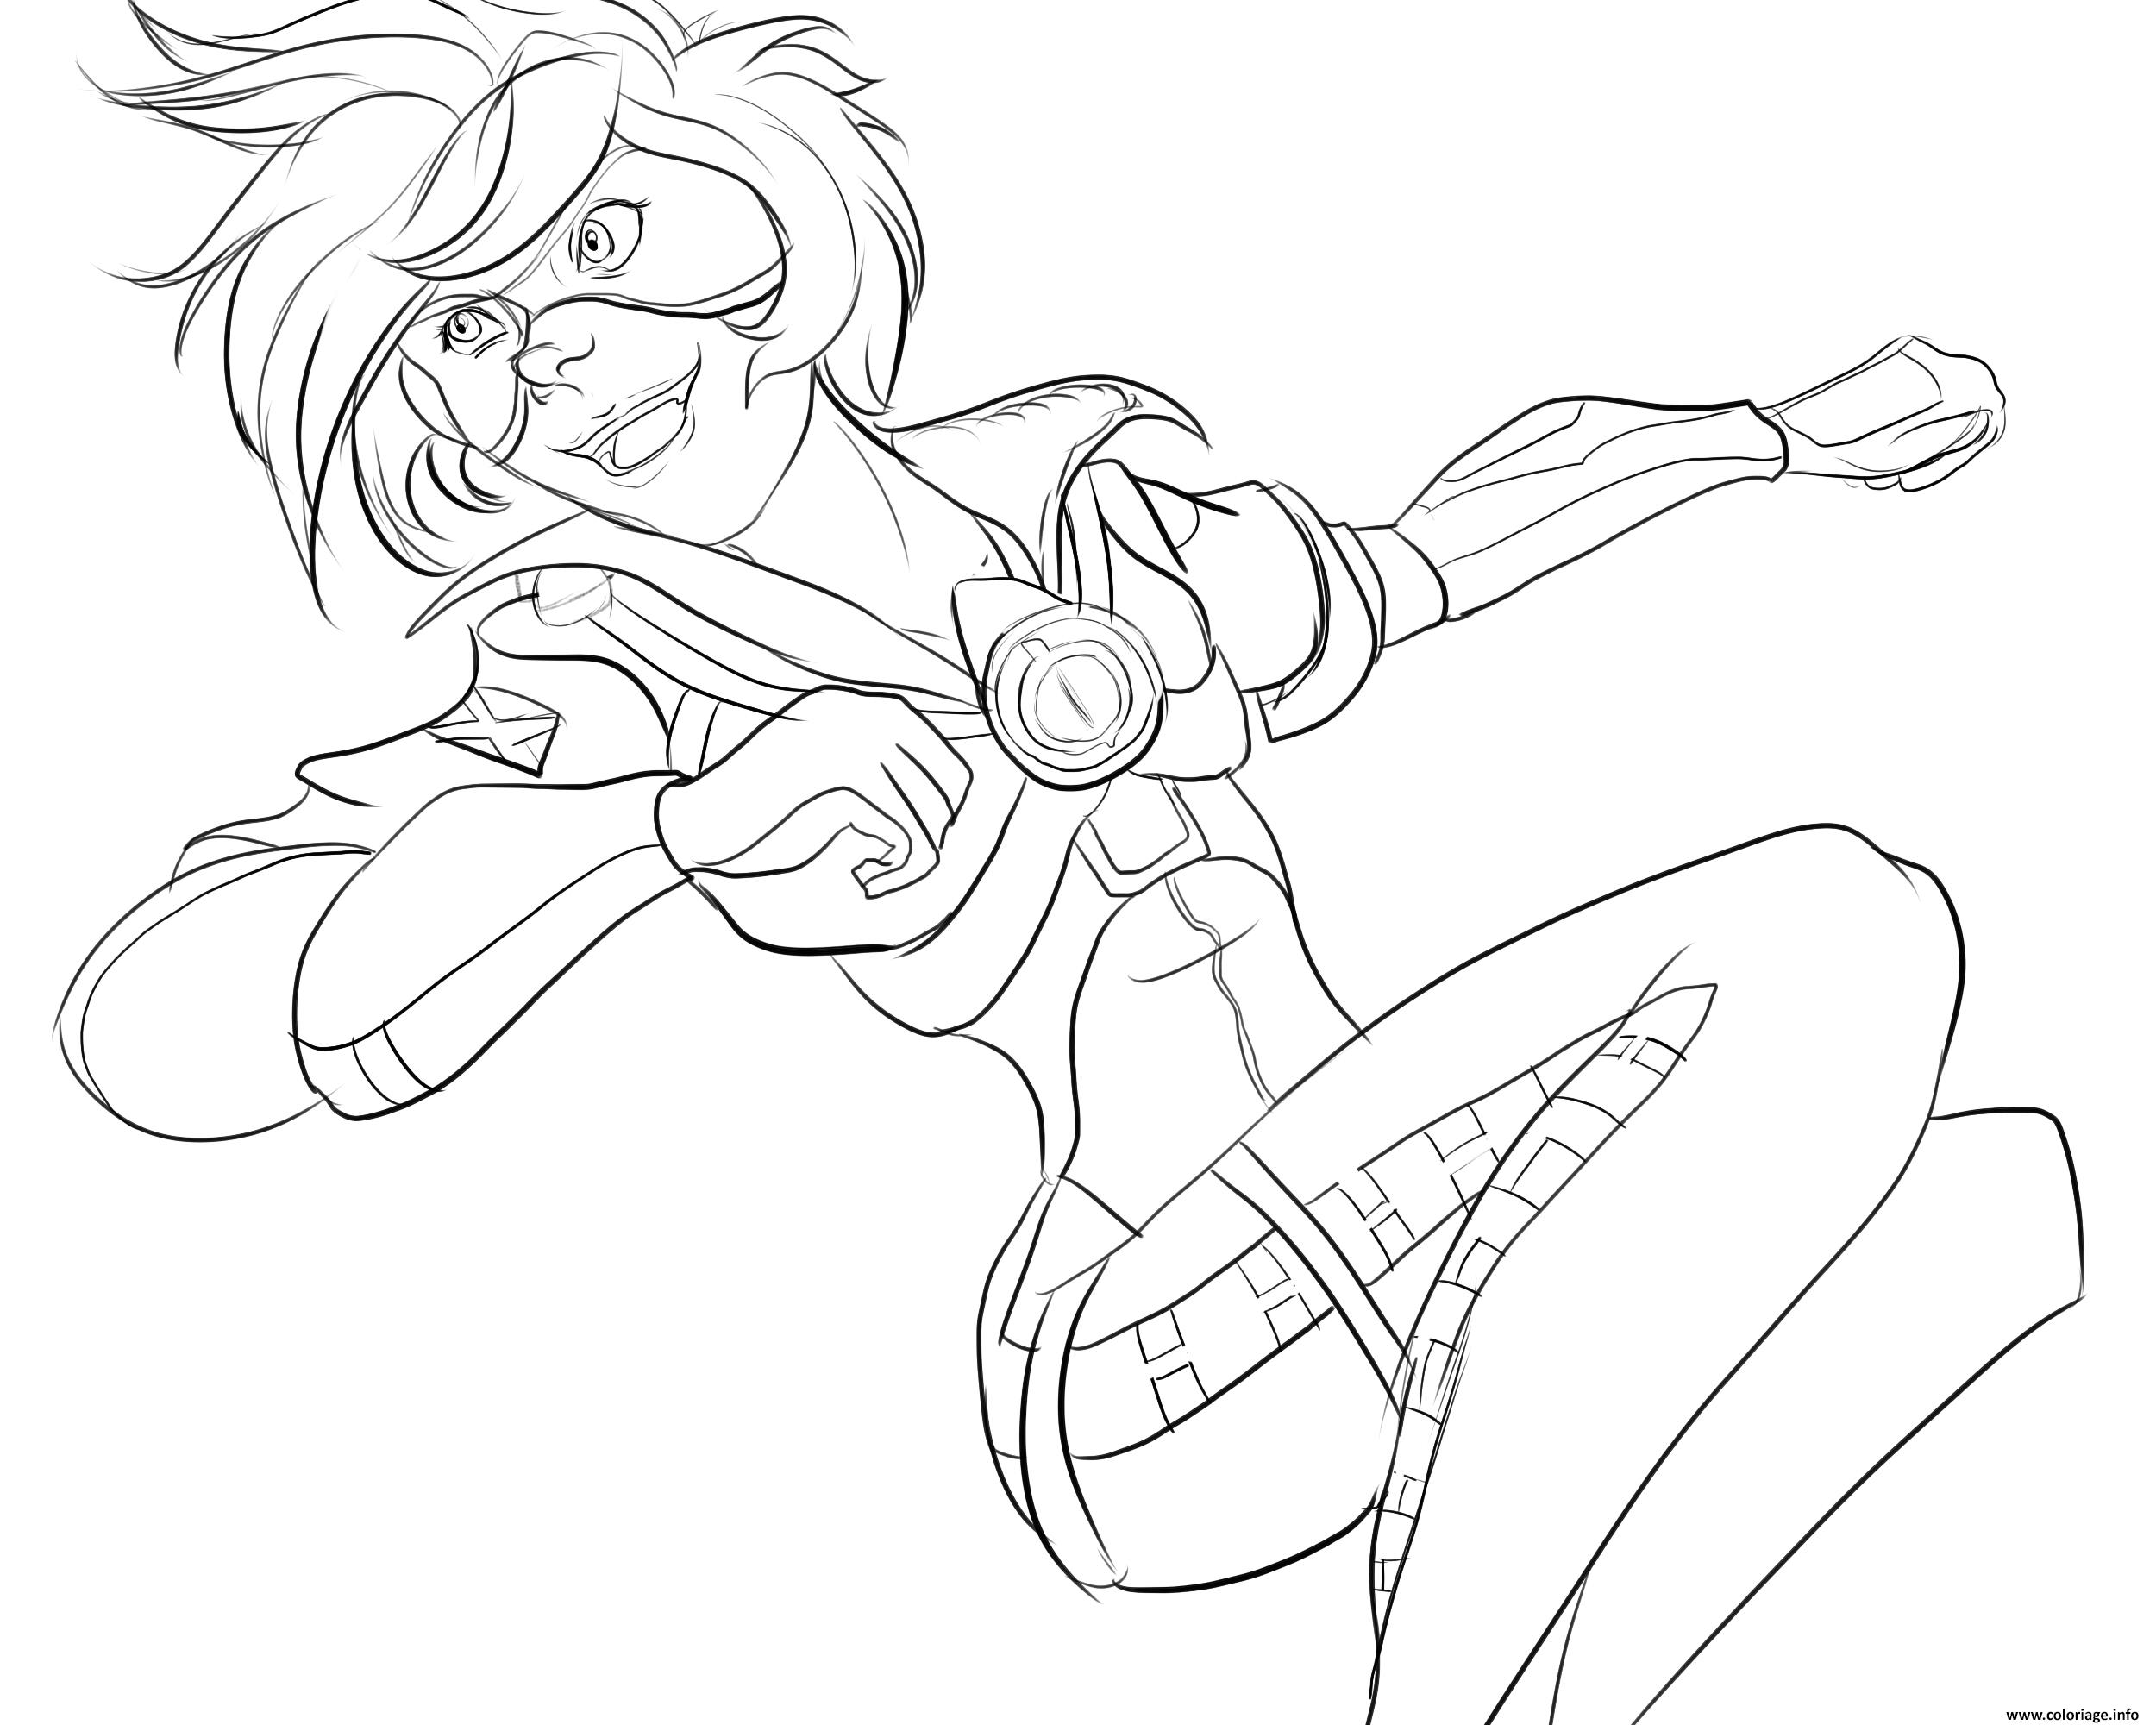 Download Coloriage Overwatch Tracer Line By Fayed Dessin Overwatch à imprimer